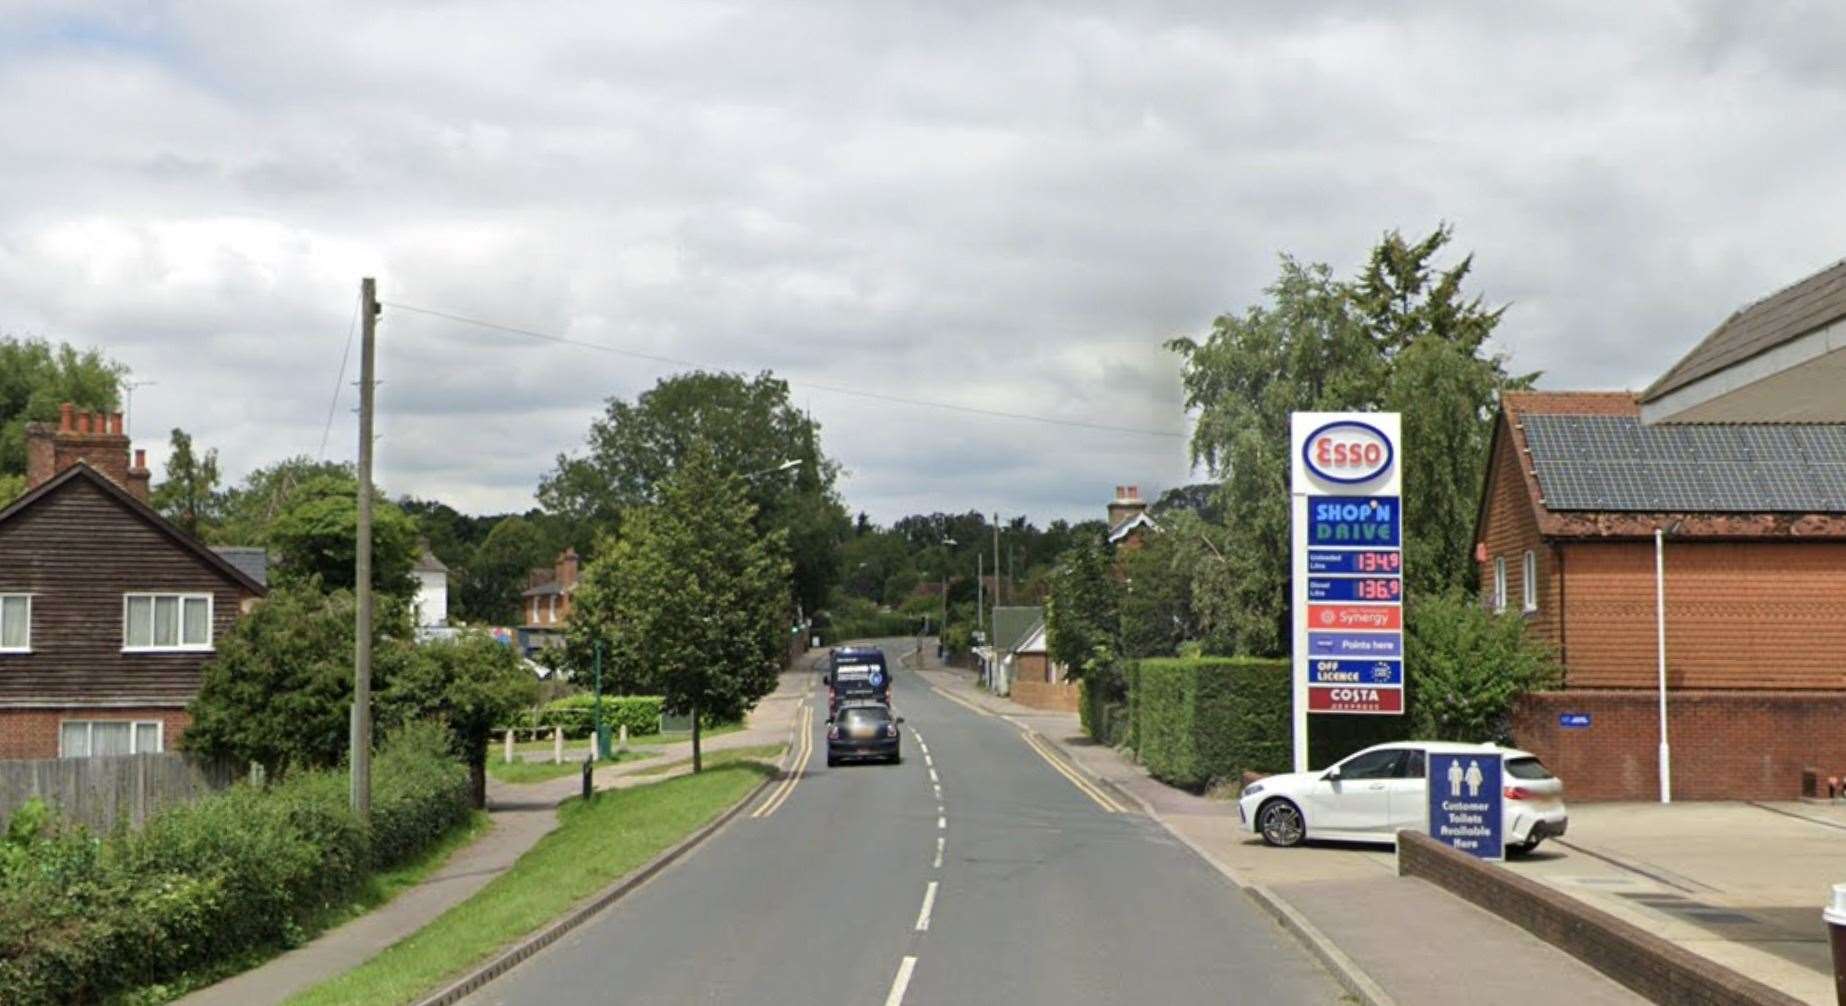 Residents in St Michaels near Tenterden are affected. Photo: Google